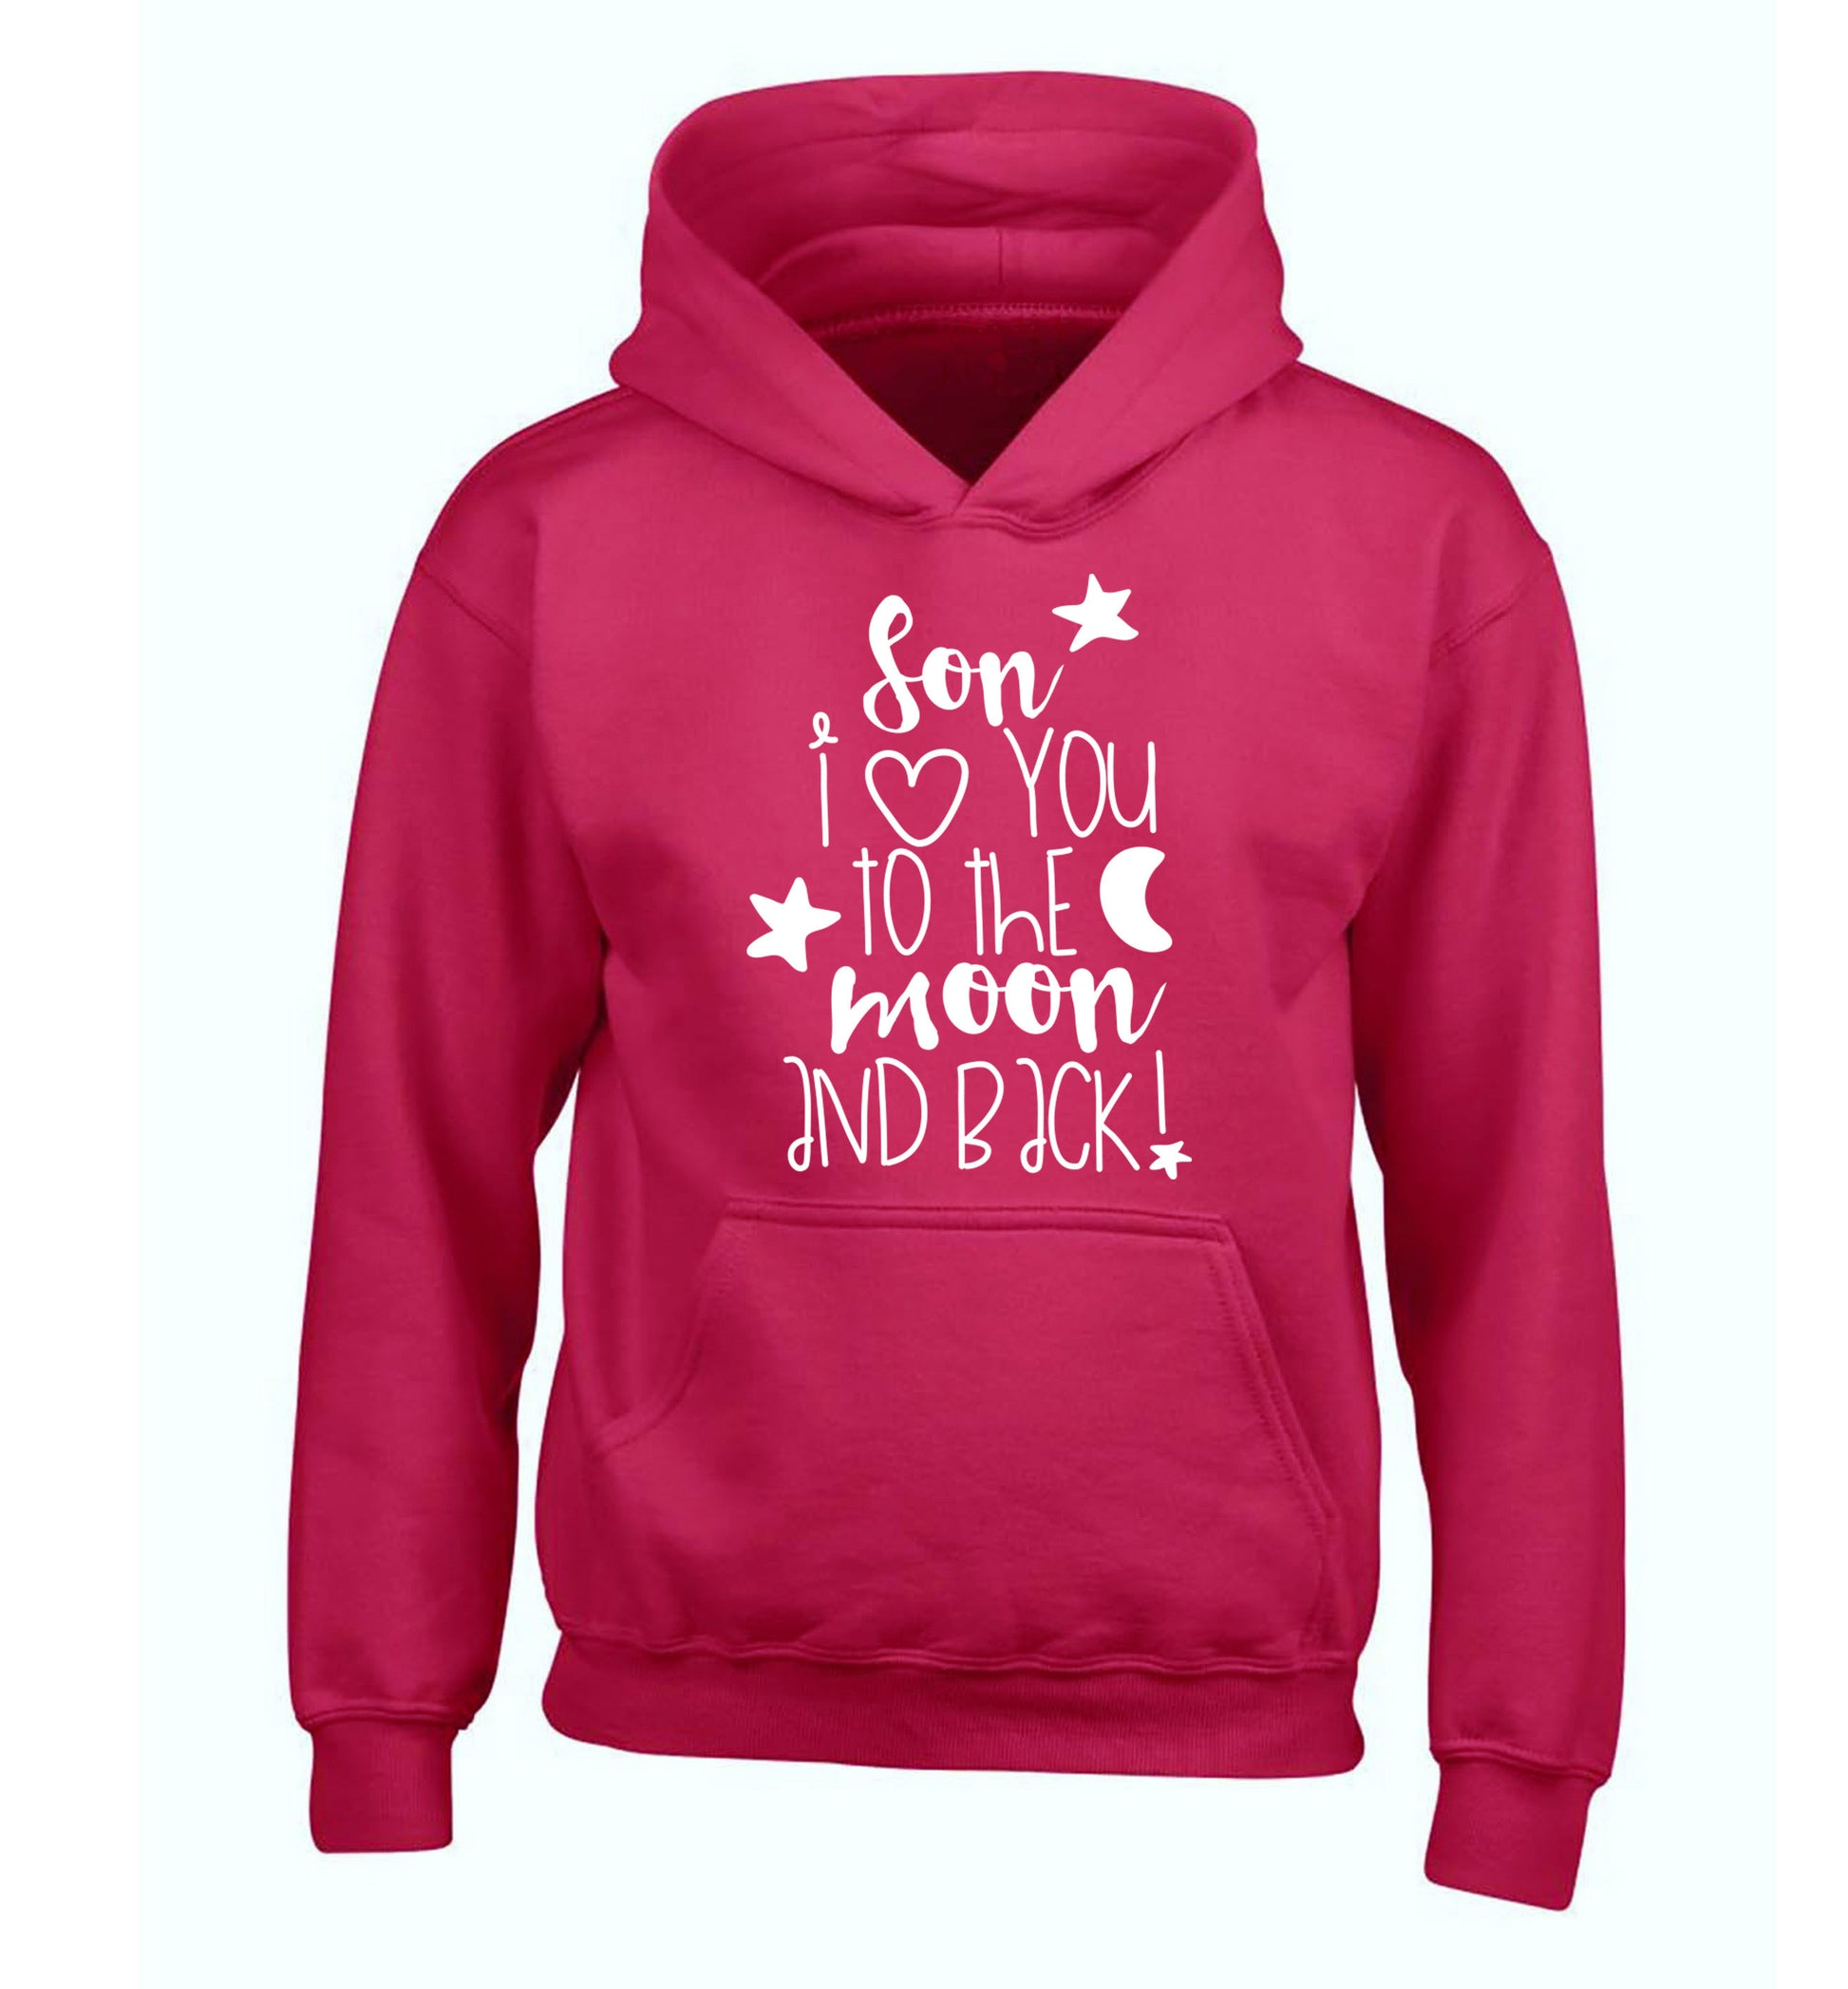 Son I love you to the moon and back children's pink hoodie 12-14 Years